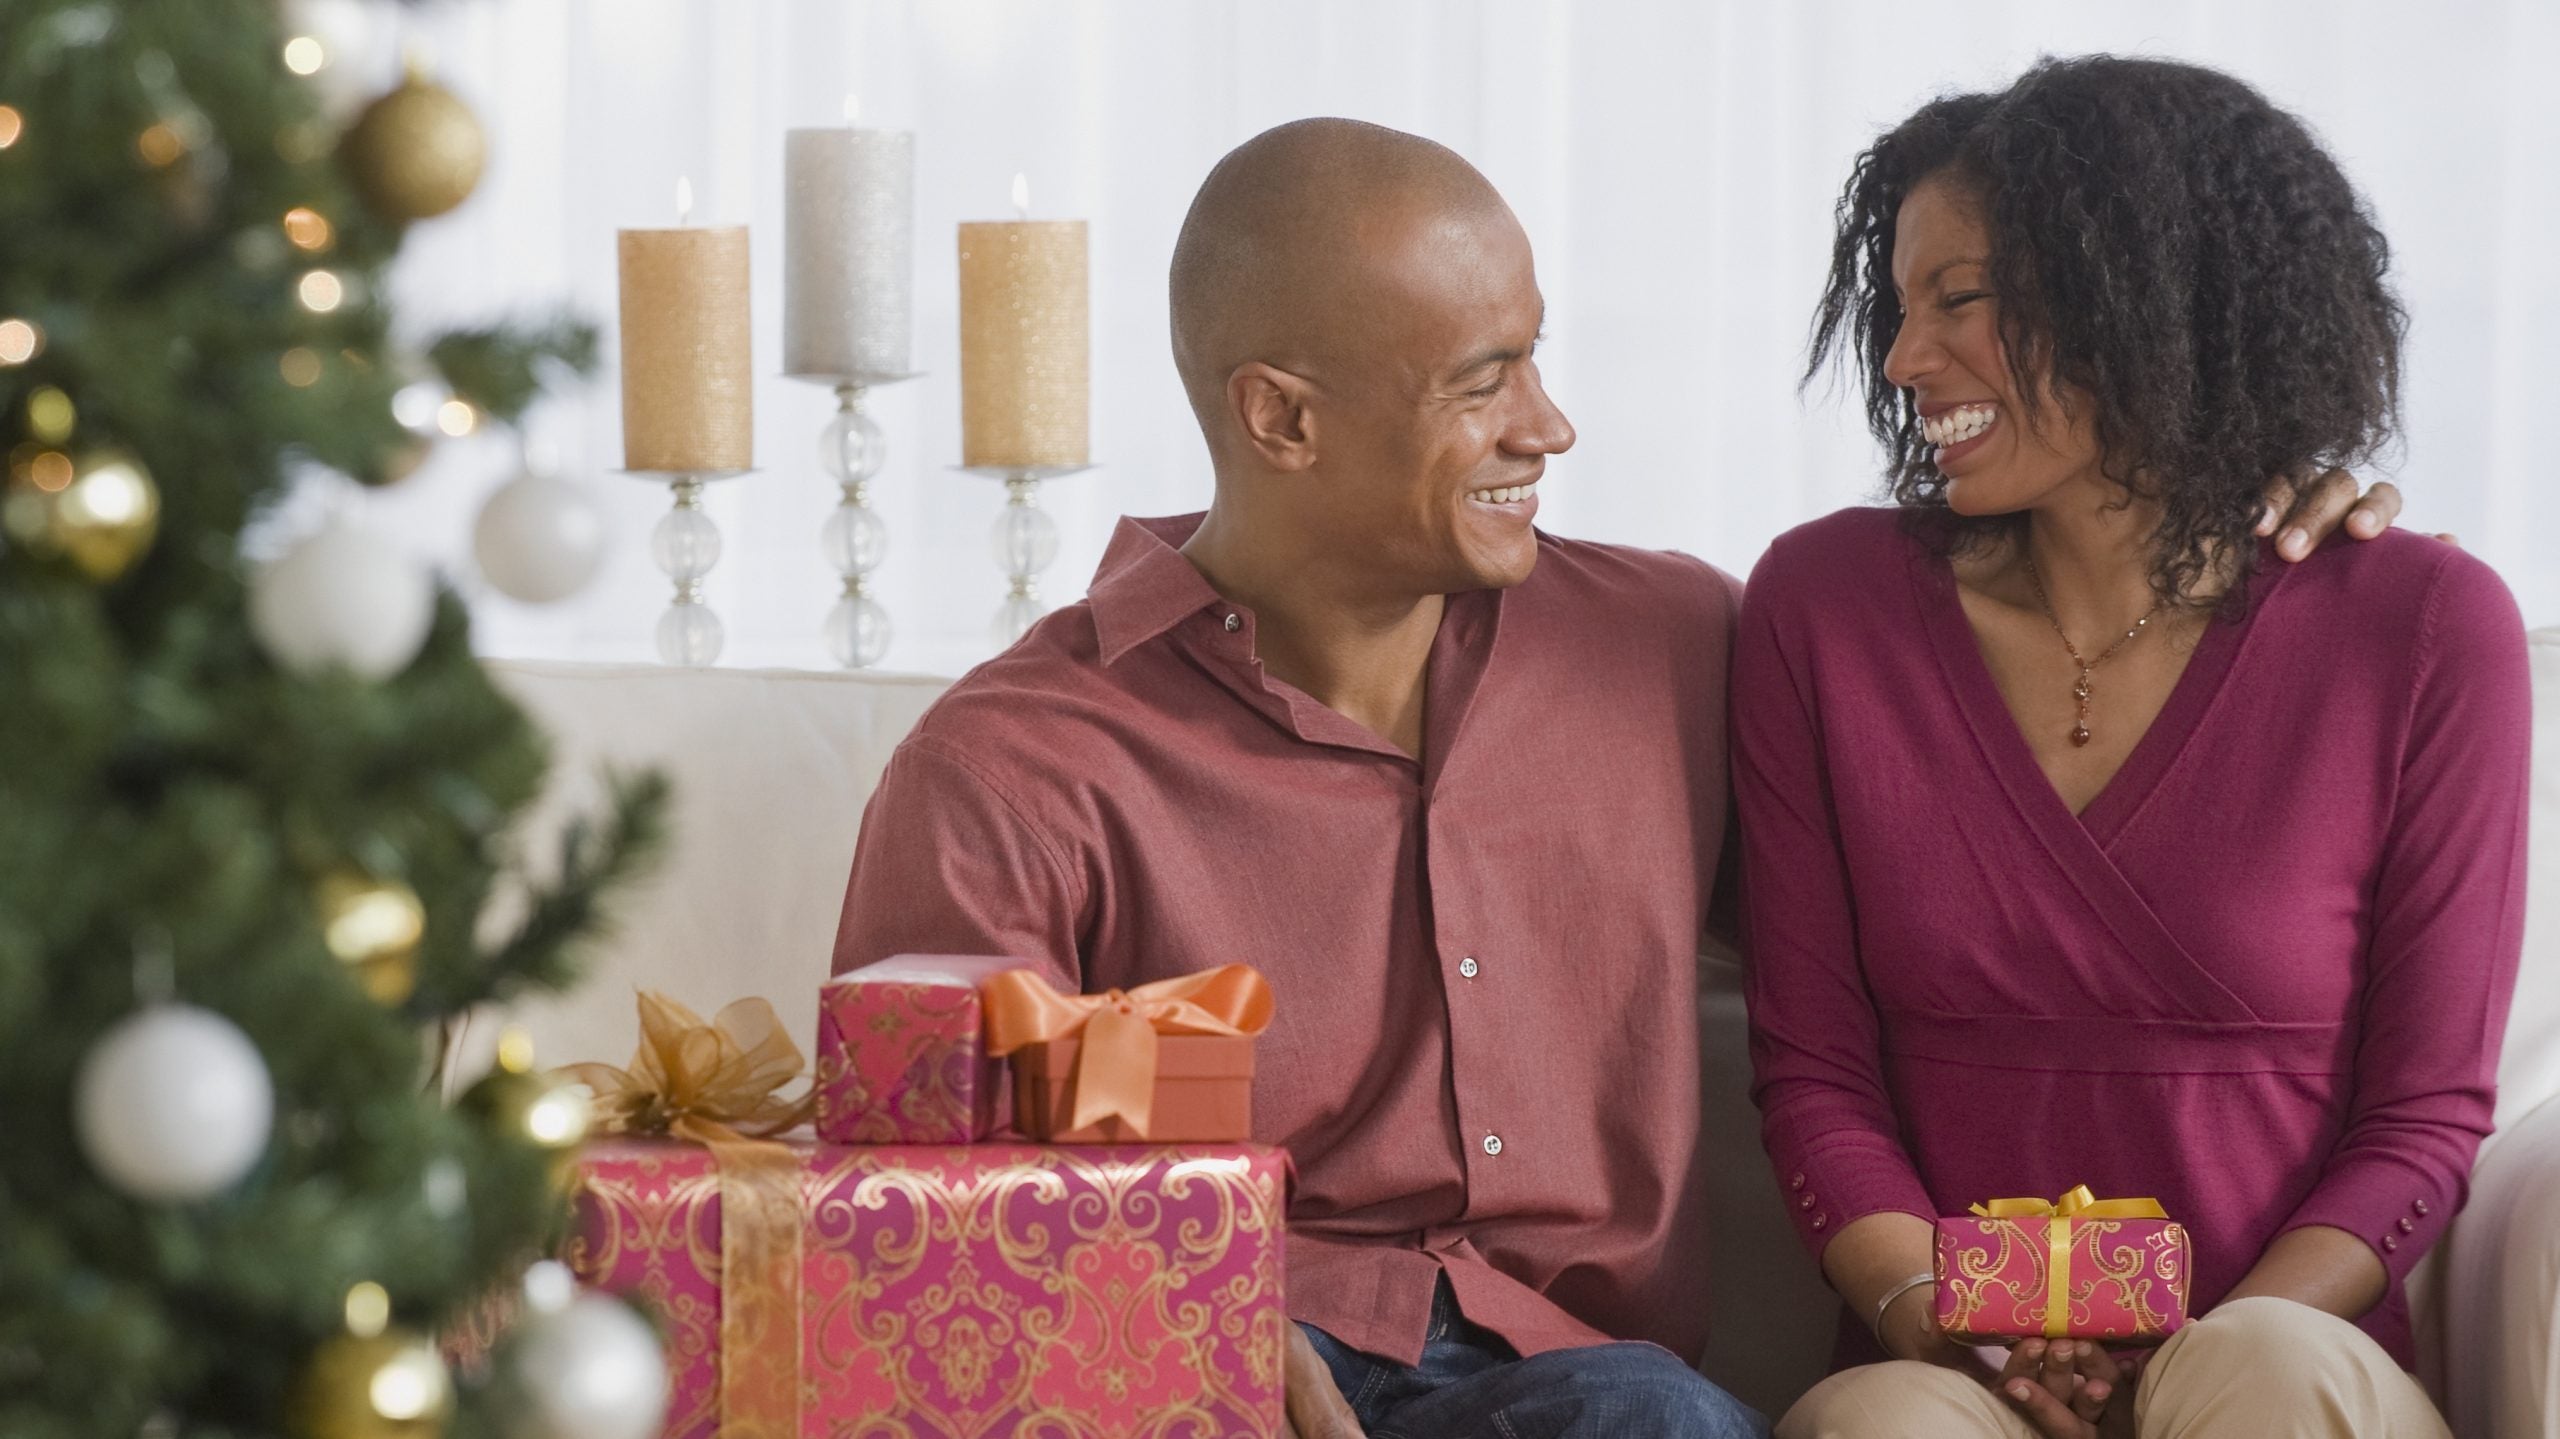 8 Couples Share Their Favorite Holiday Traditions